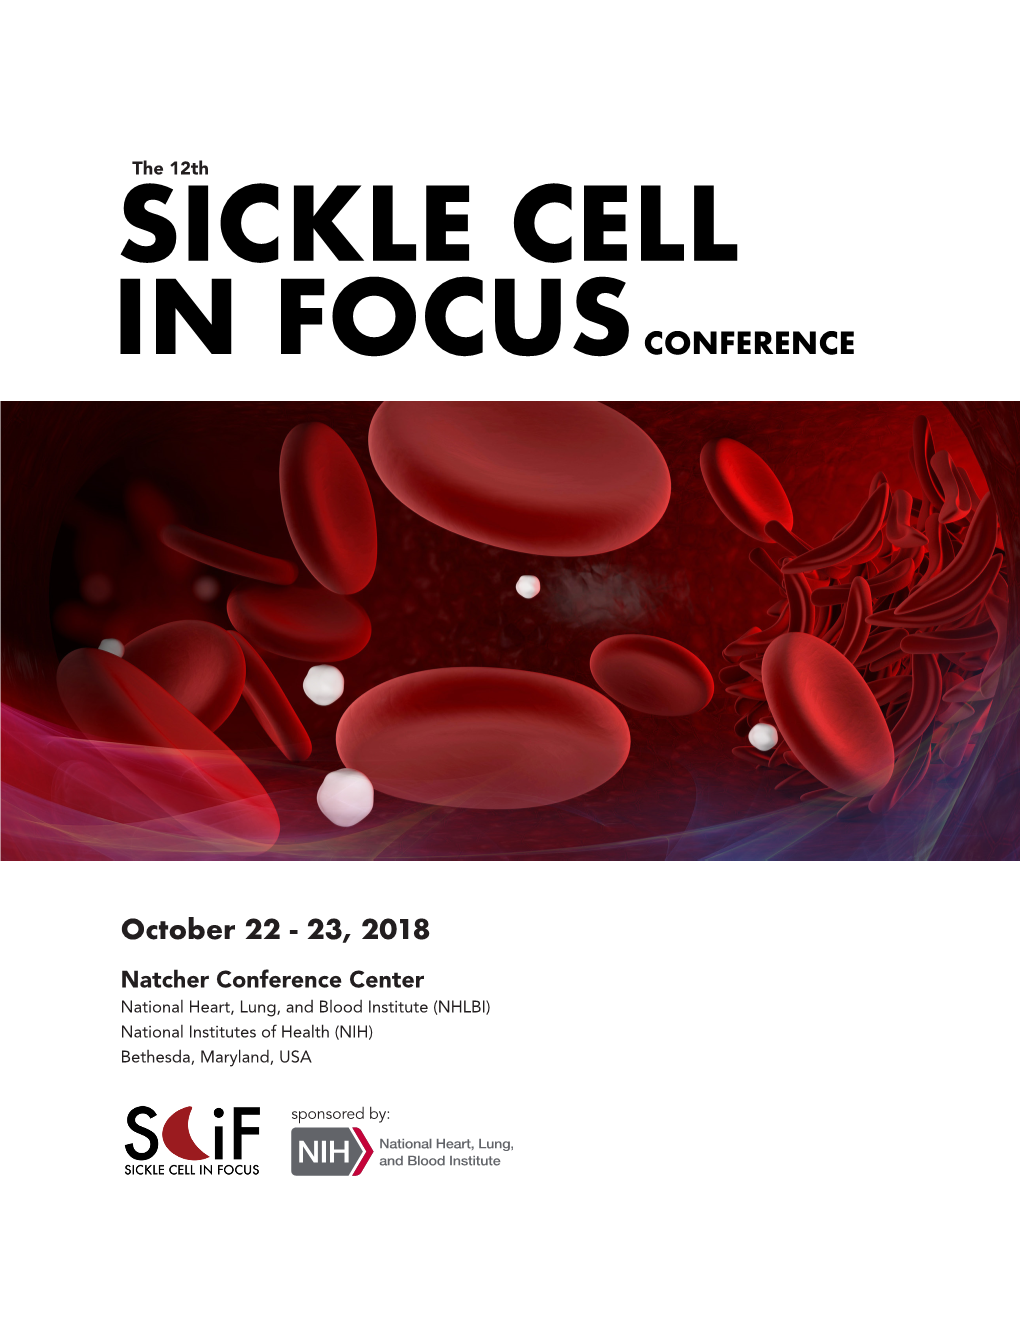 The 12Th Sickle Cell in Focus Conference